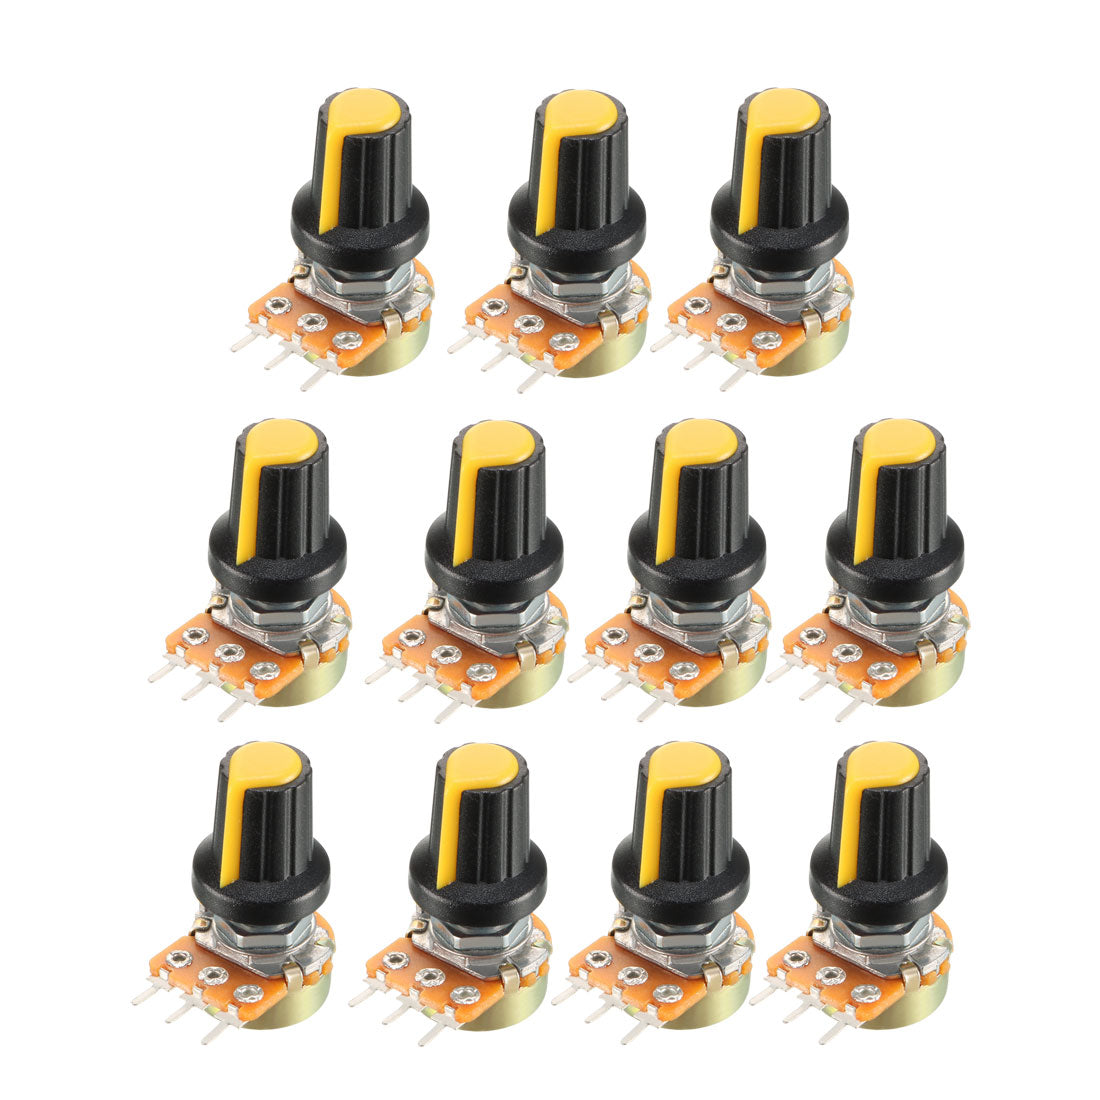 uxcell Uxcell 11Pcs 5K Ohm Variable Resistors Single Turn Rotary Carbon Film Taper Potentiometer with Knobs